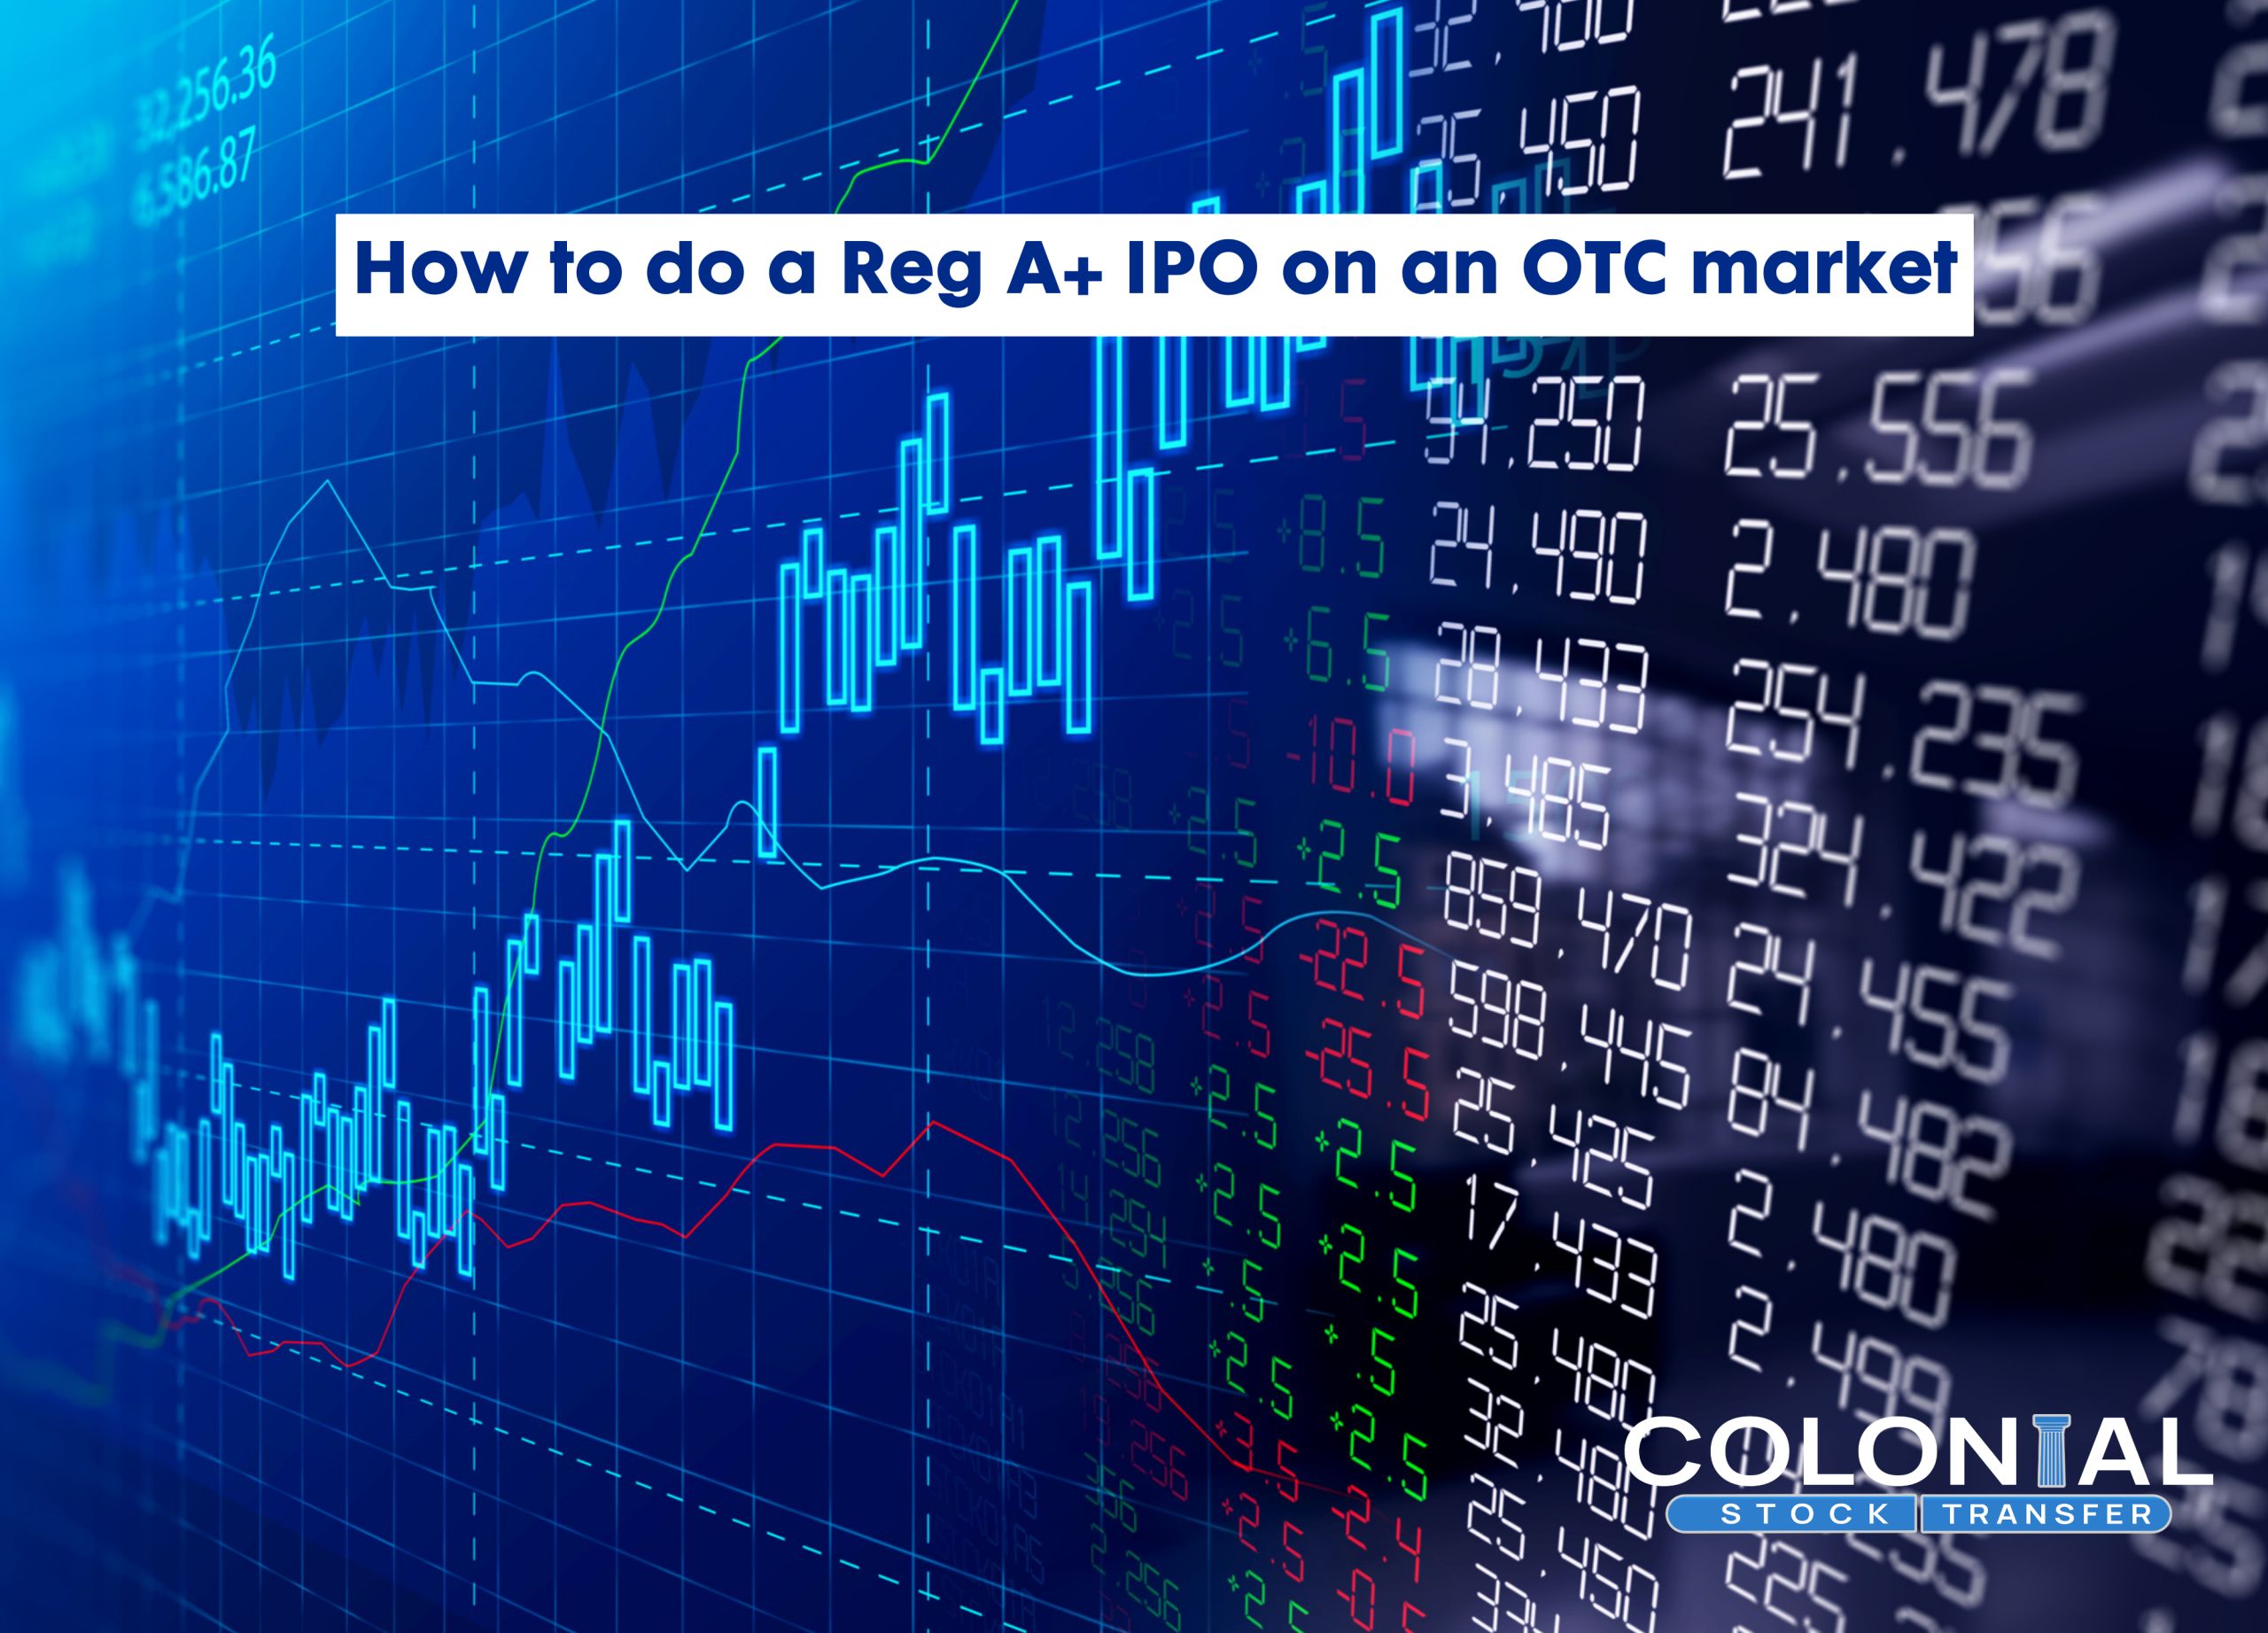 How to do a Reg A+ IPO on an OTC market